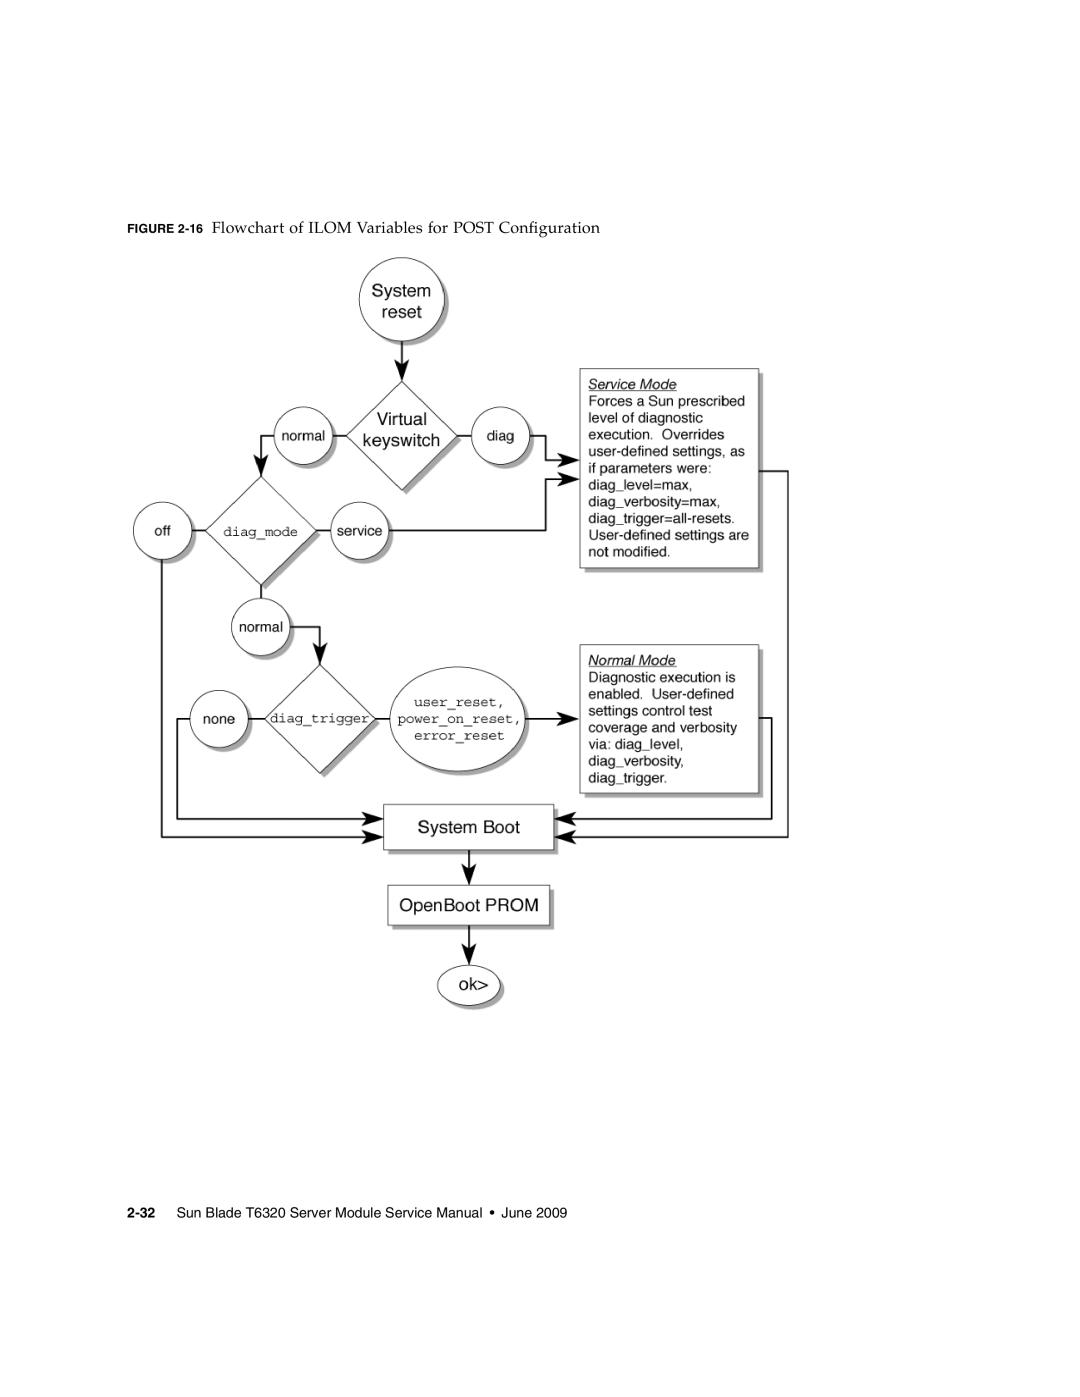 Sun Microsystems T6320 service manual 16 Flowchart of ILOM Variables for POST Configuration 